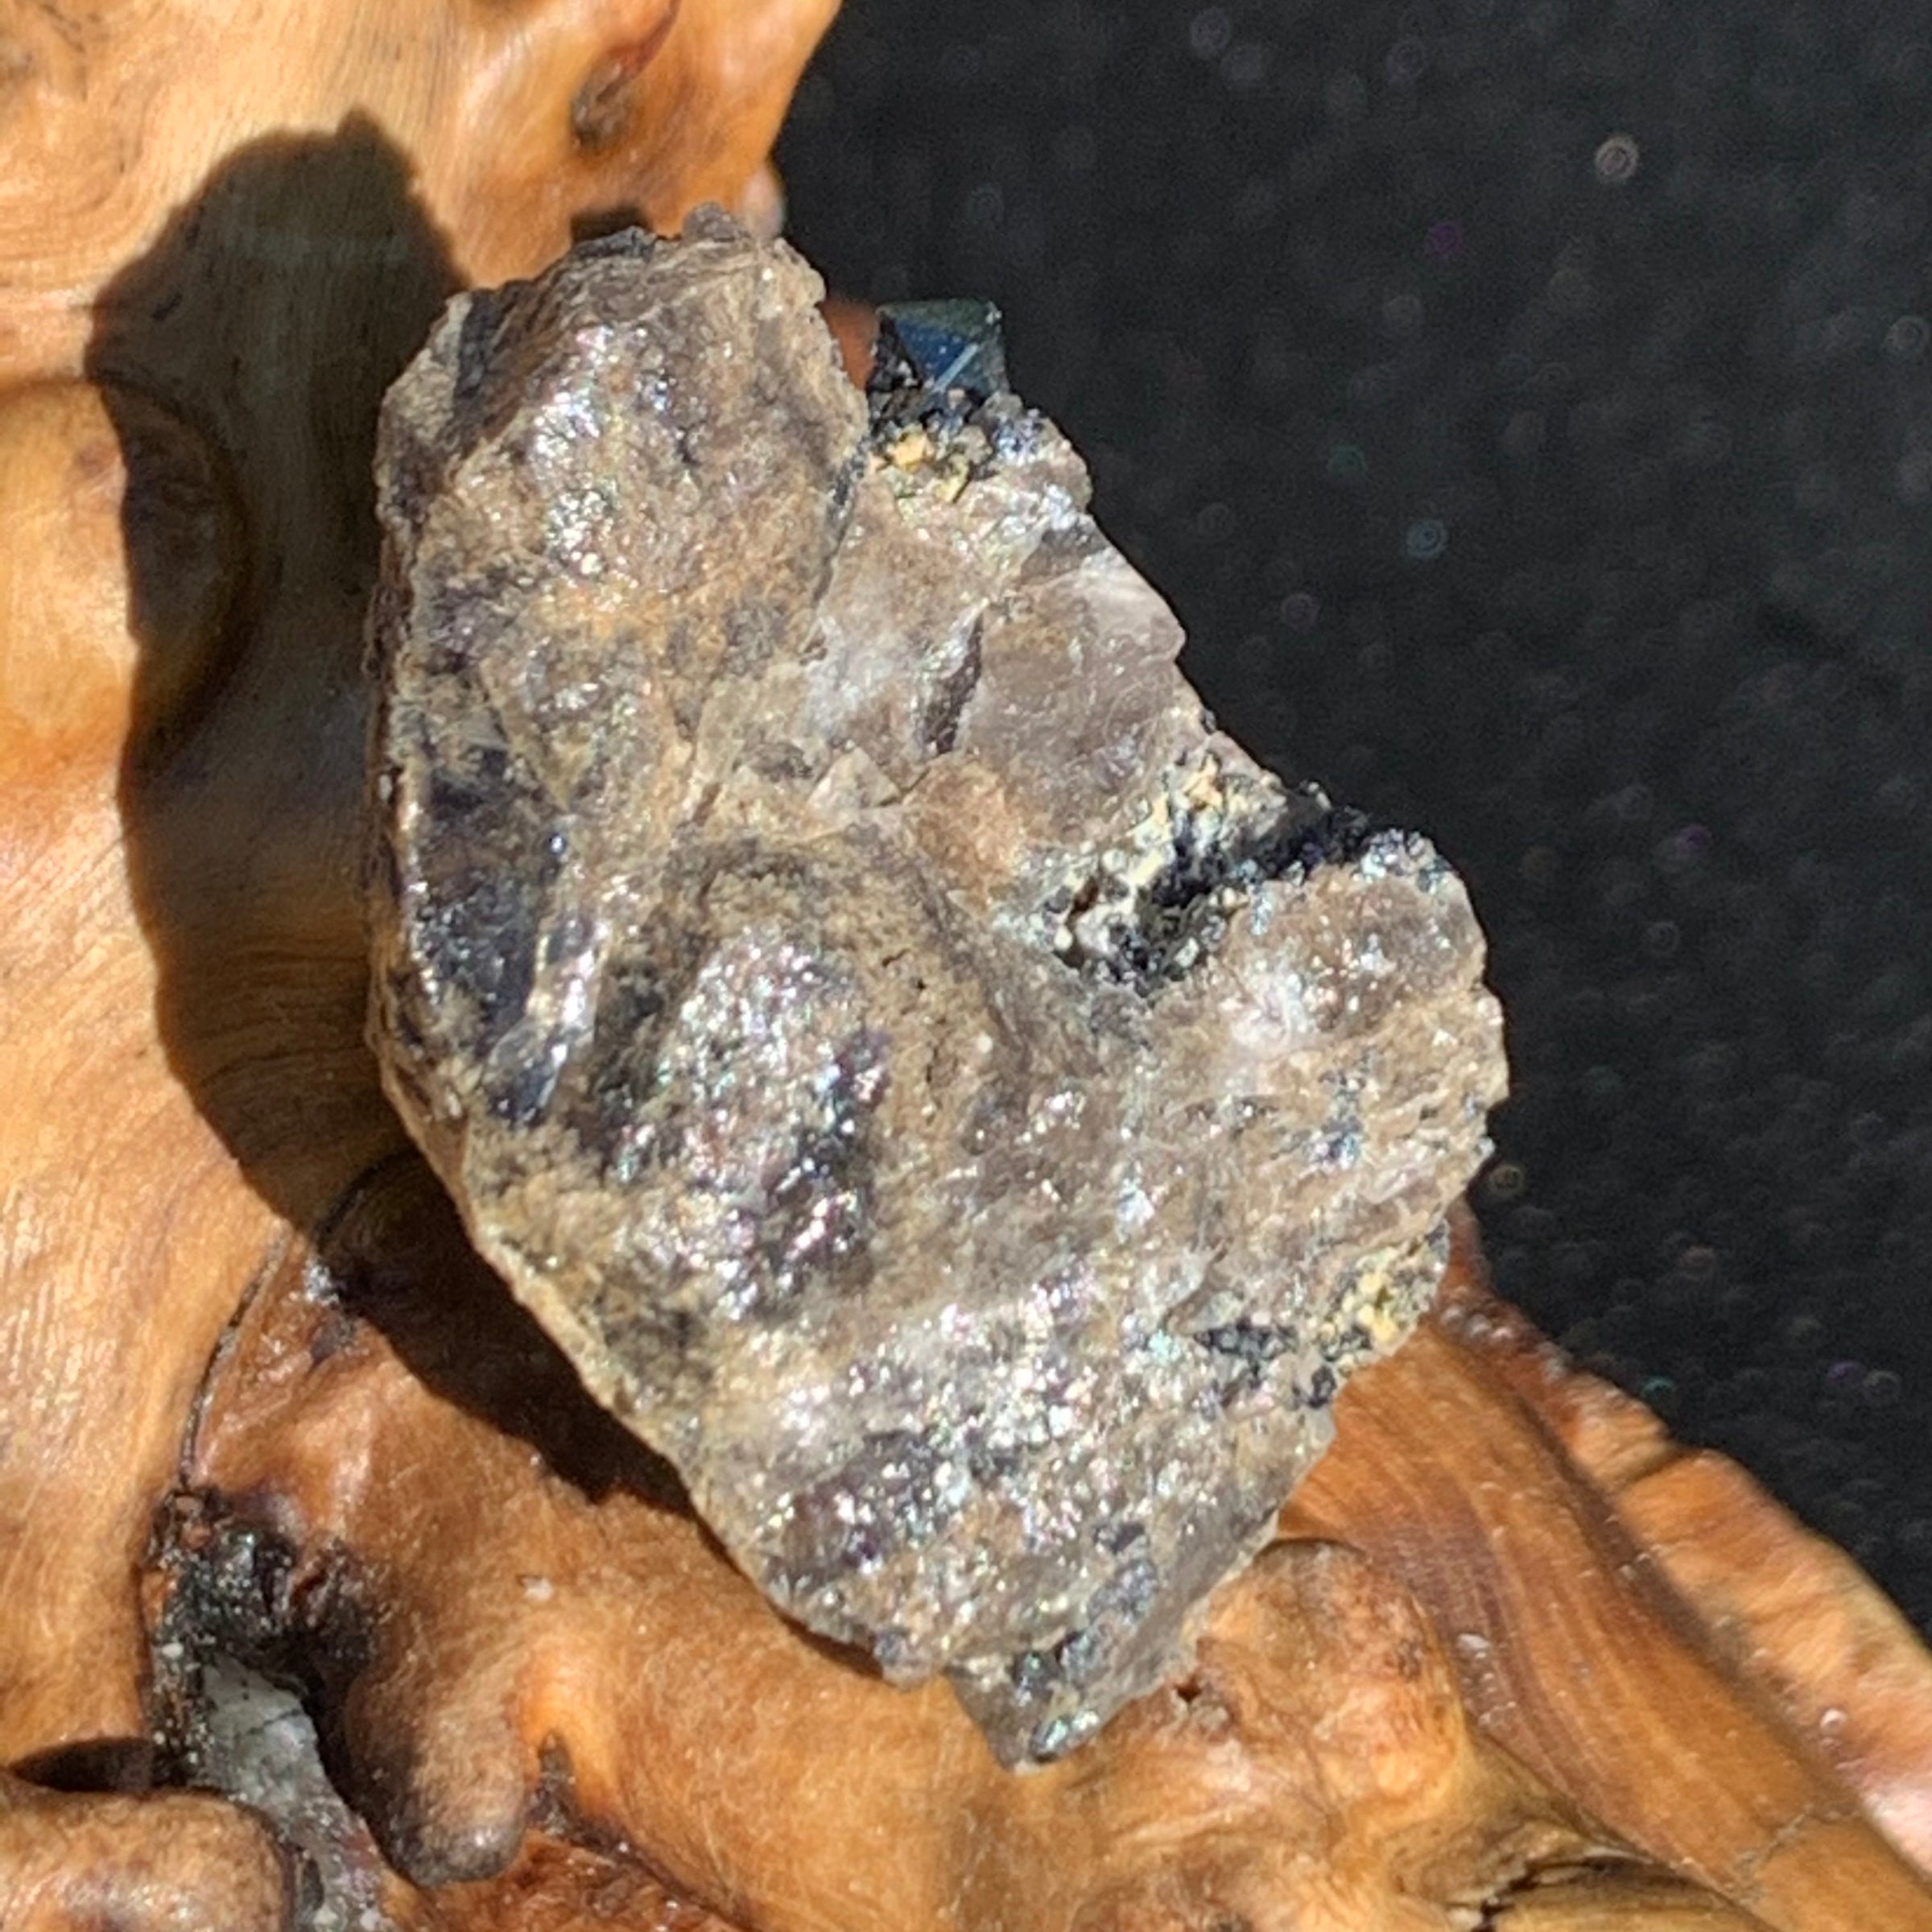 small brookite crystals on a smokey quartz cluster sitting on driftwood for display